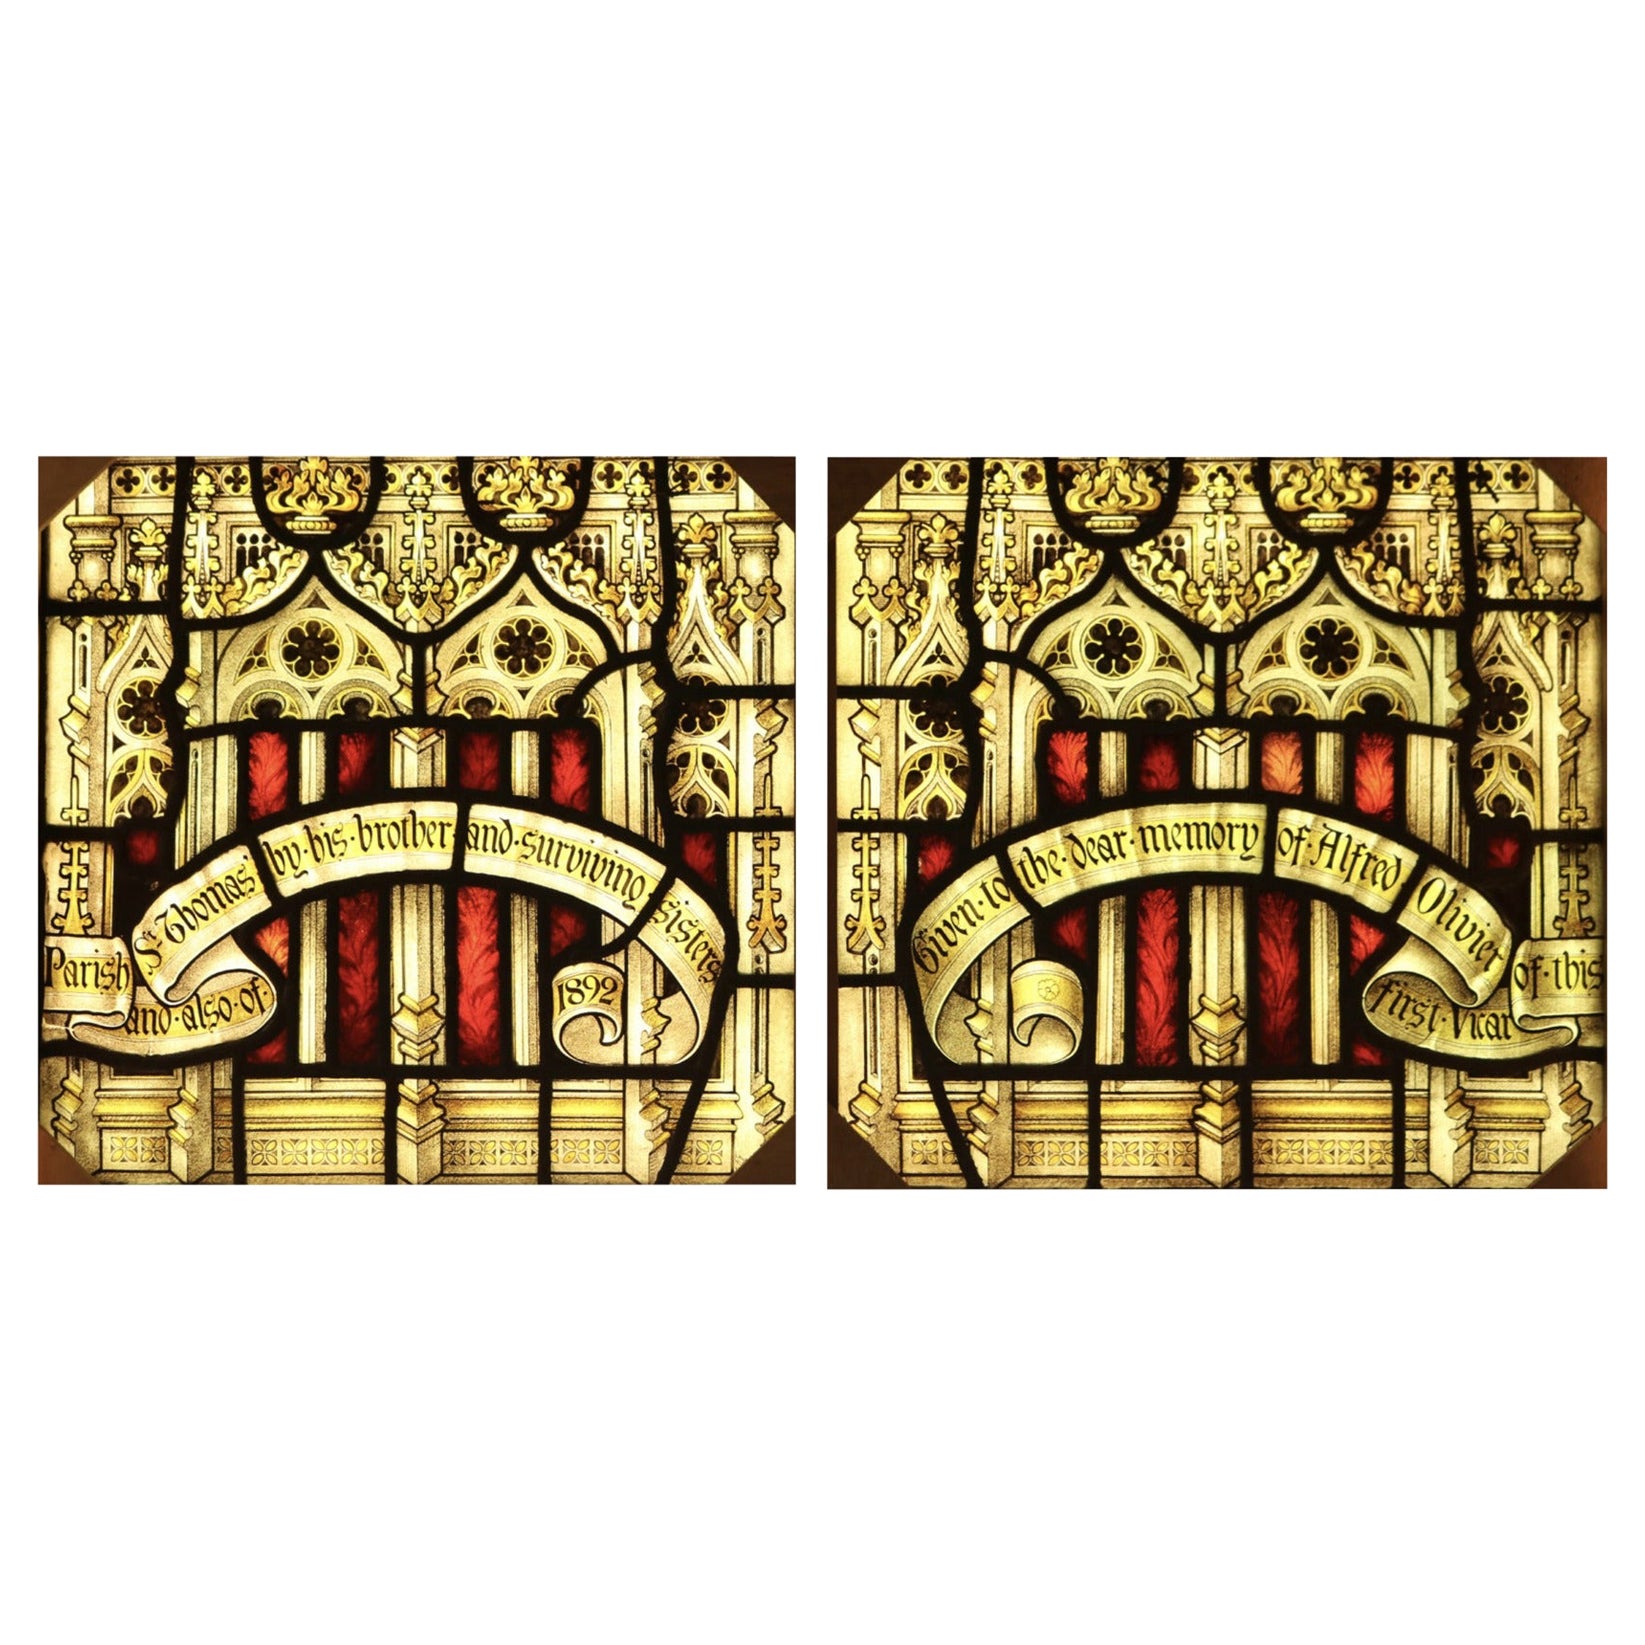 Pair of Antique Stained Glass Window Panels